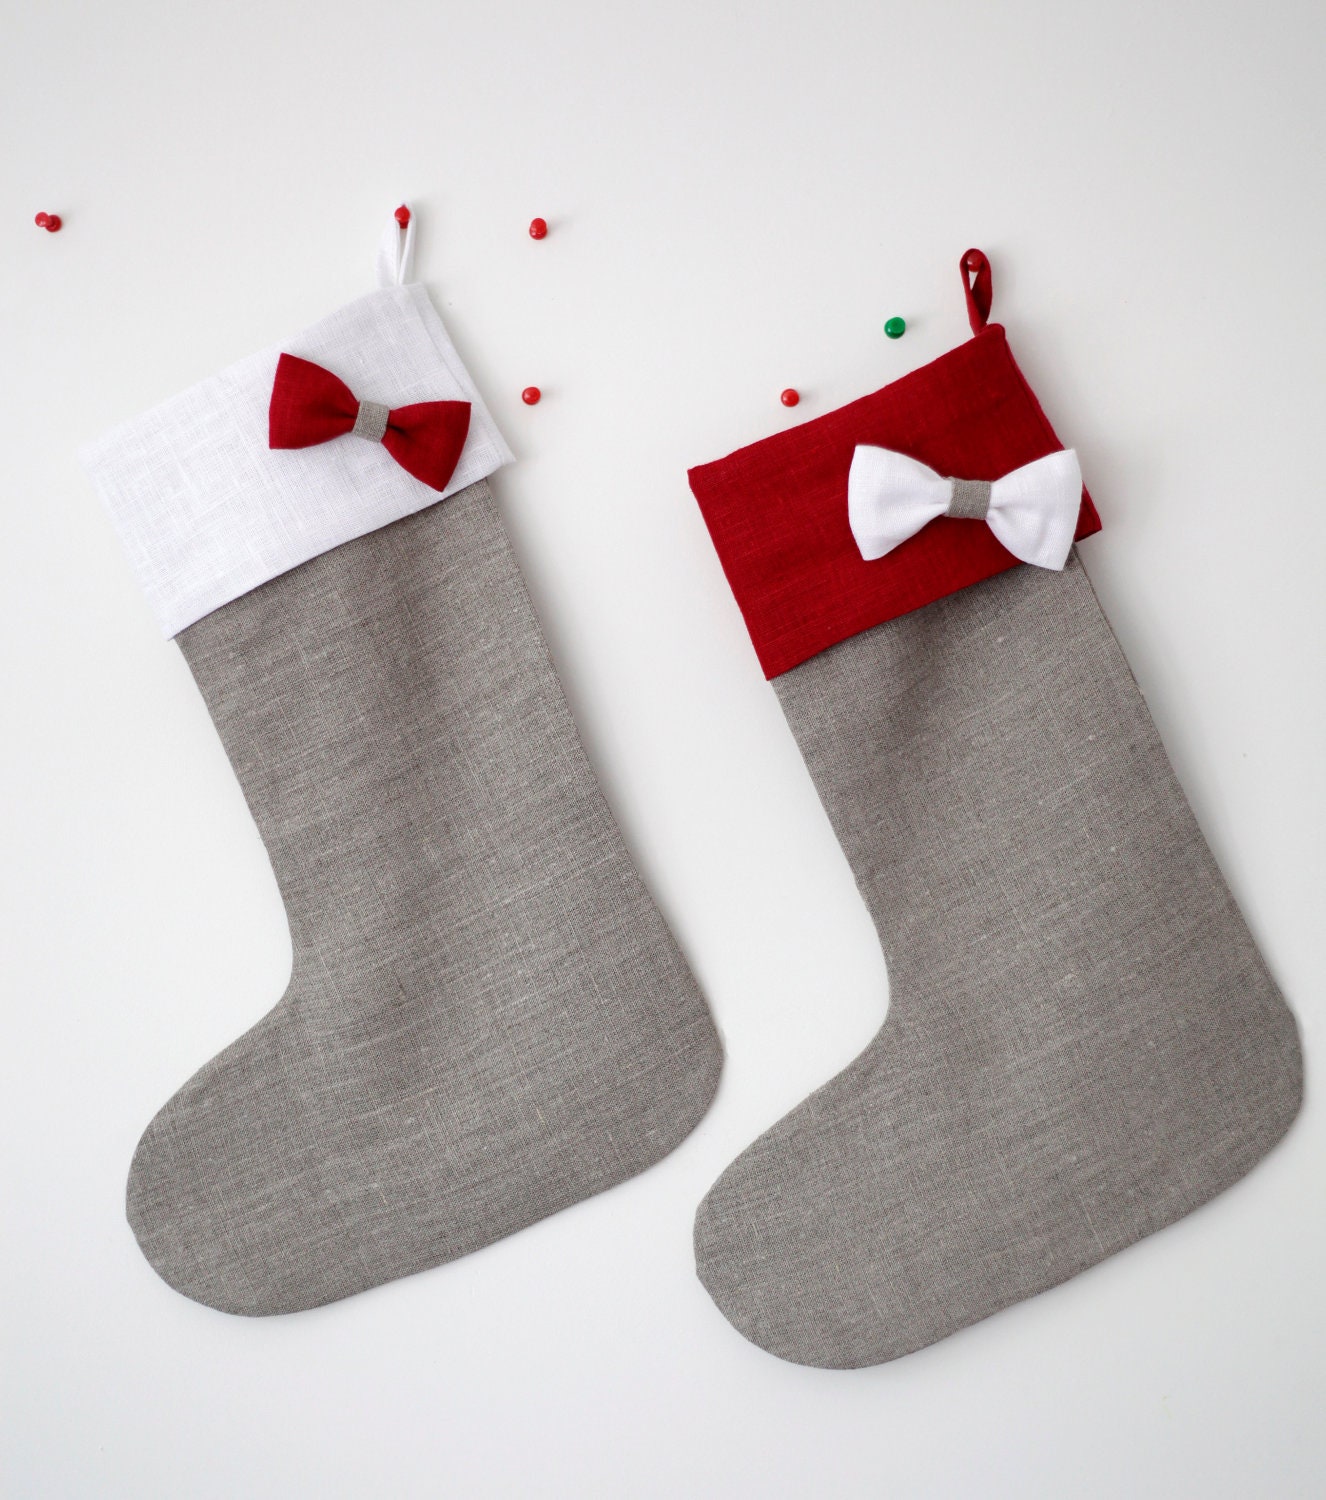 Christmas stocking - 2 linen stocking - gift idea for kids - grey with red and white top - pillowlink